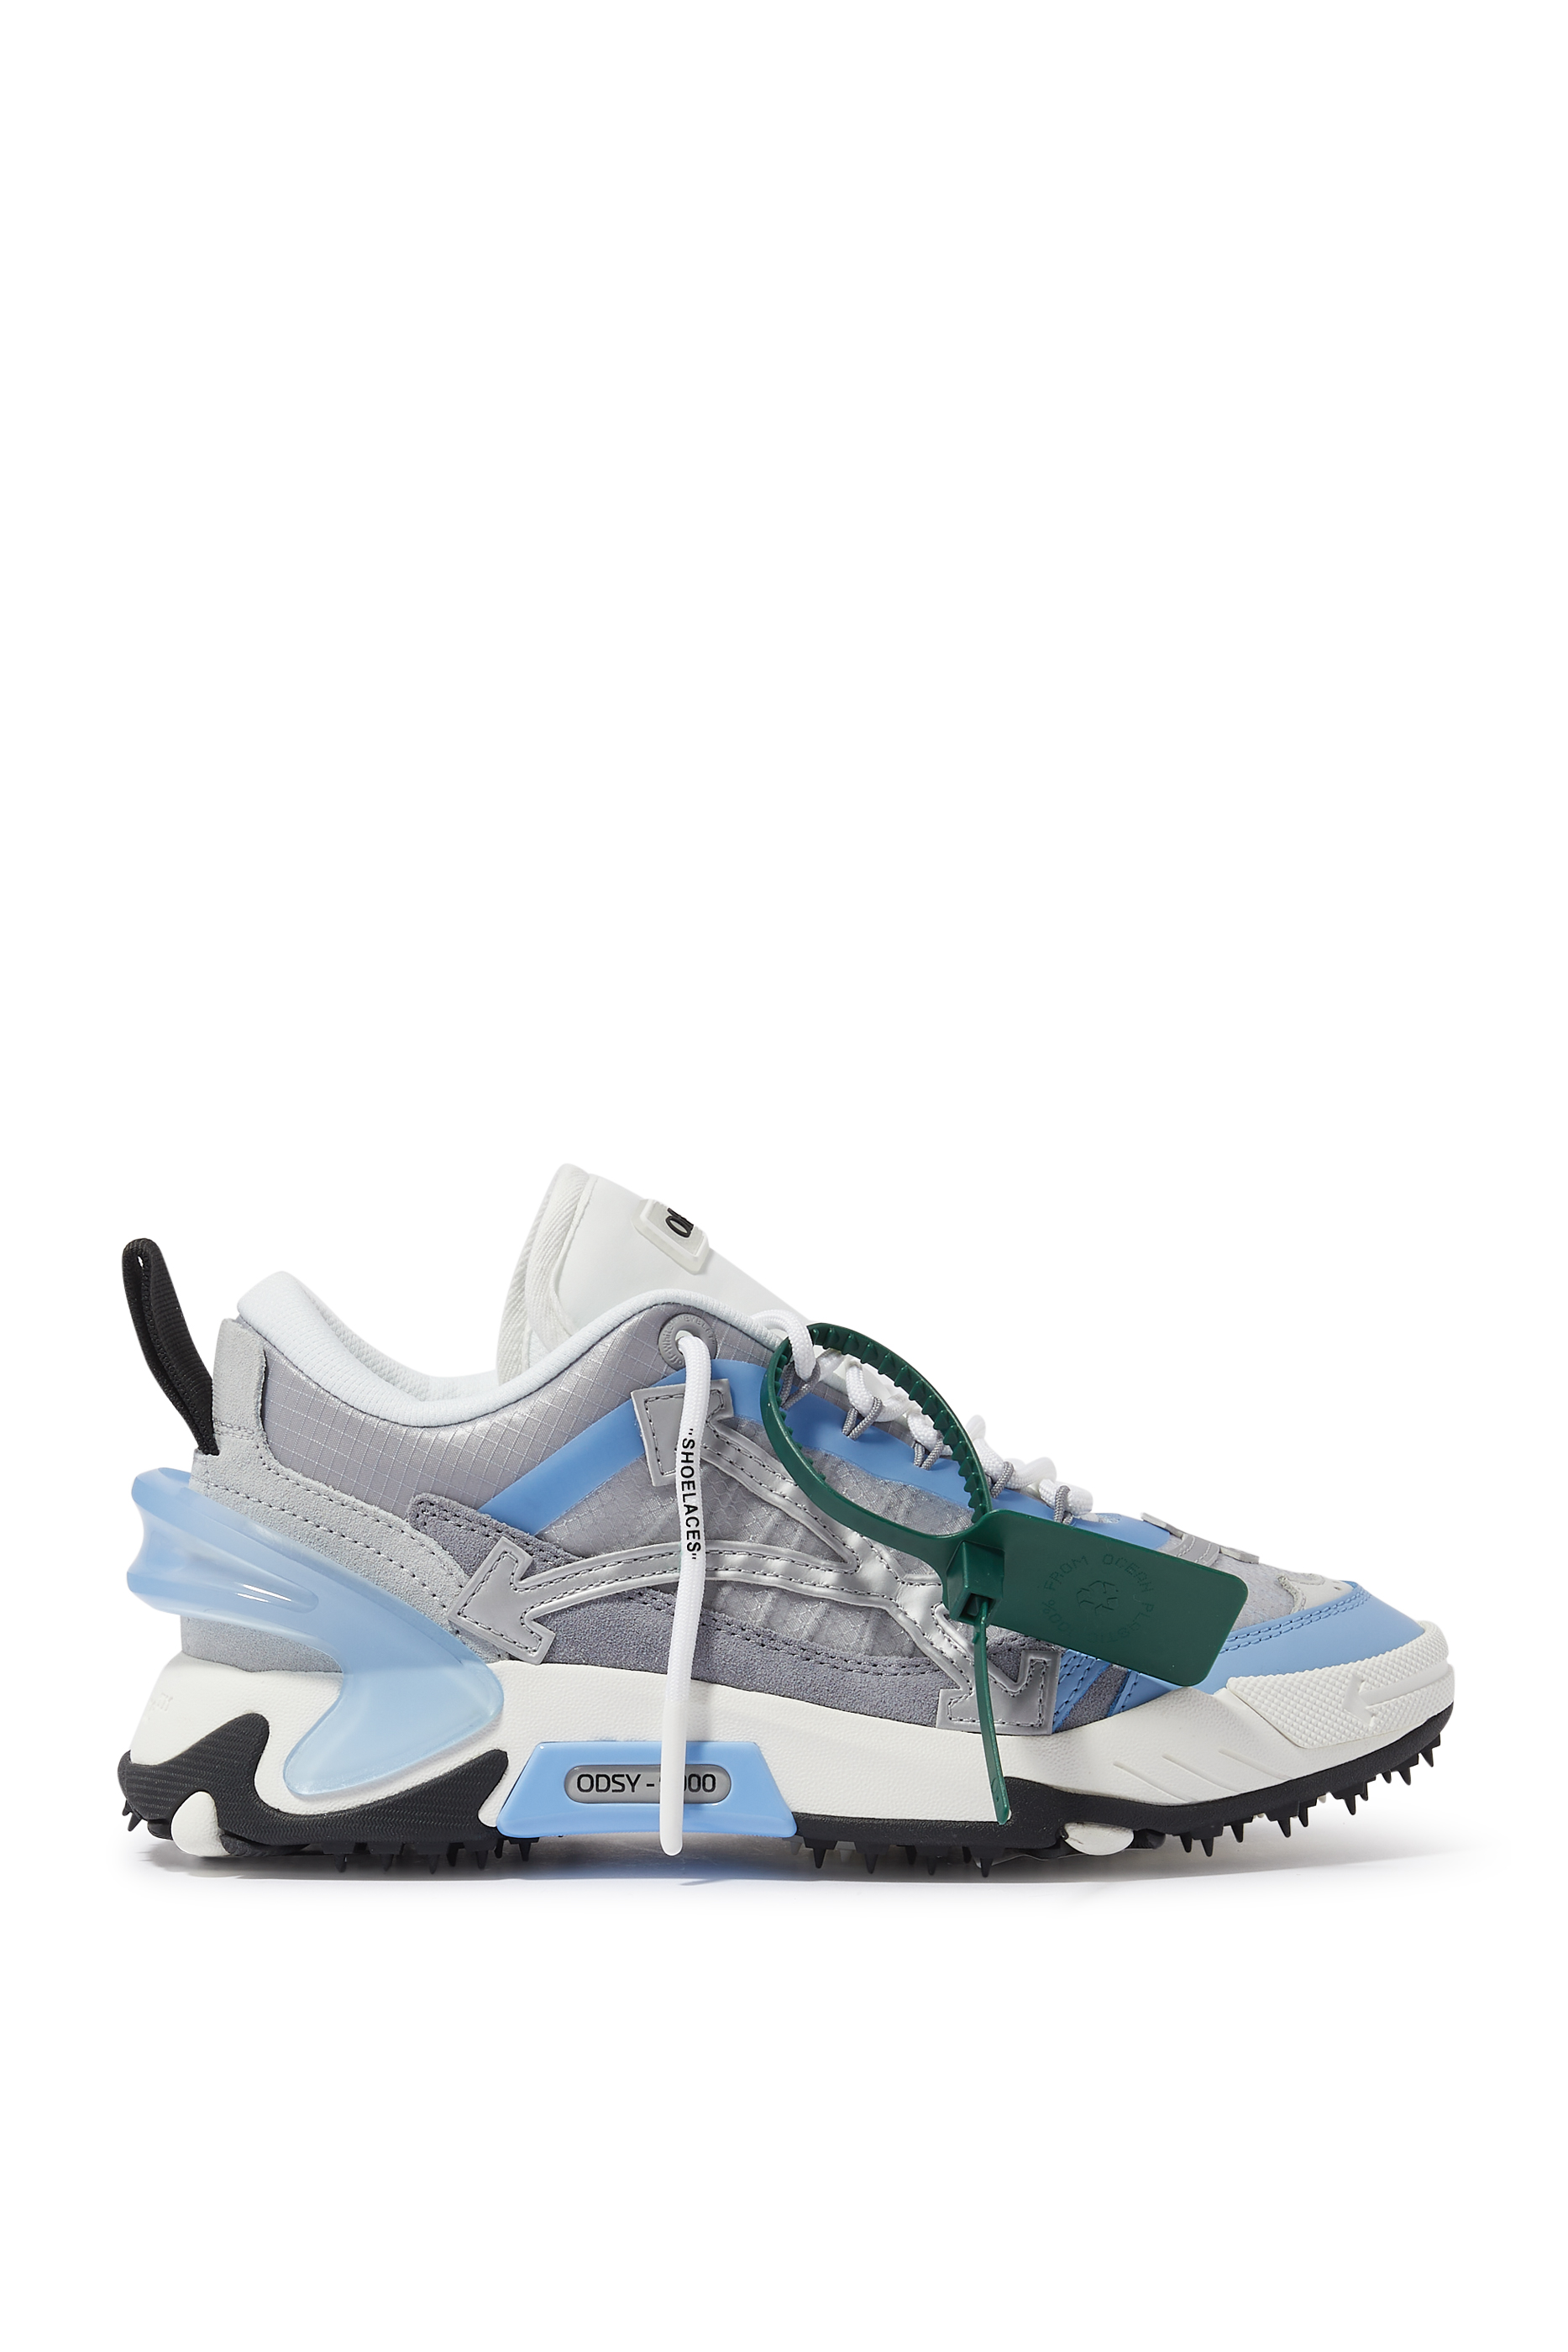 Off-White, Shoes, Off White Virgil Abloh Sneakers Odsy00